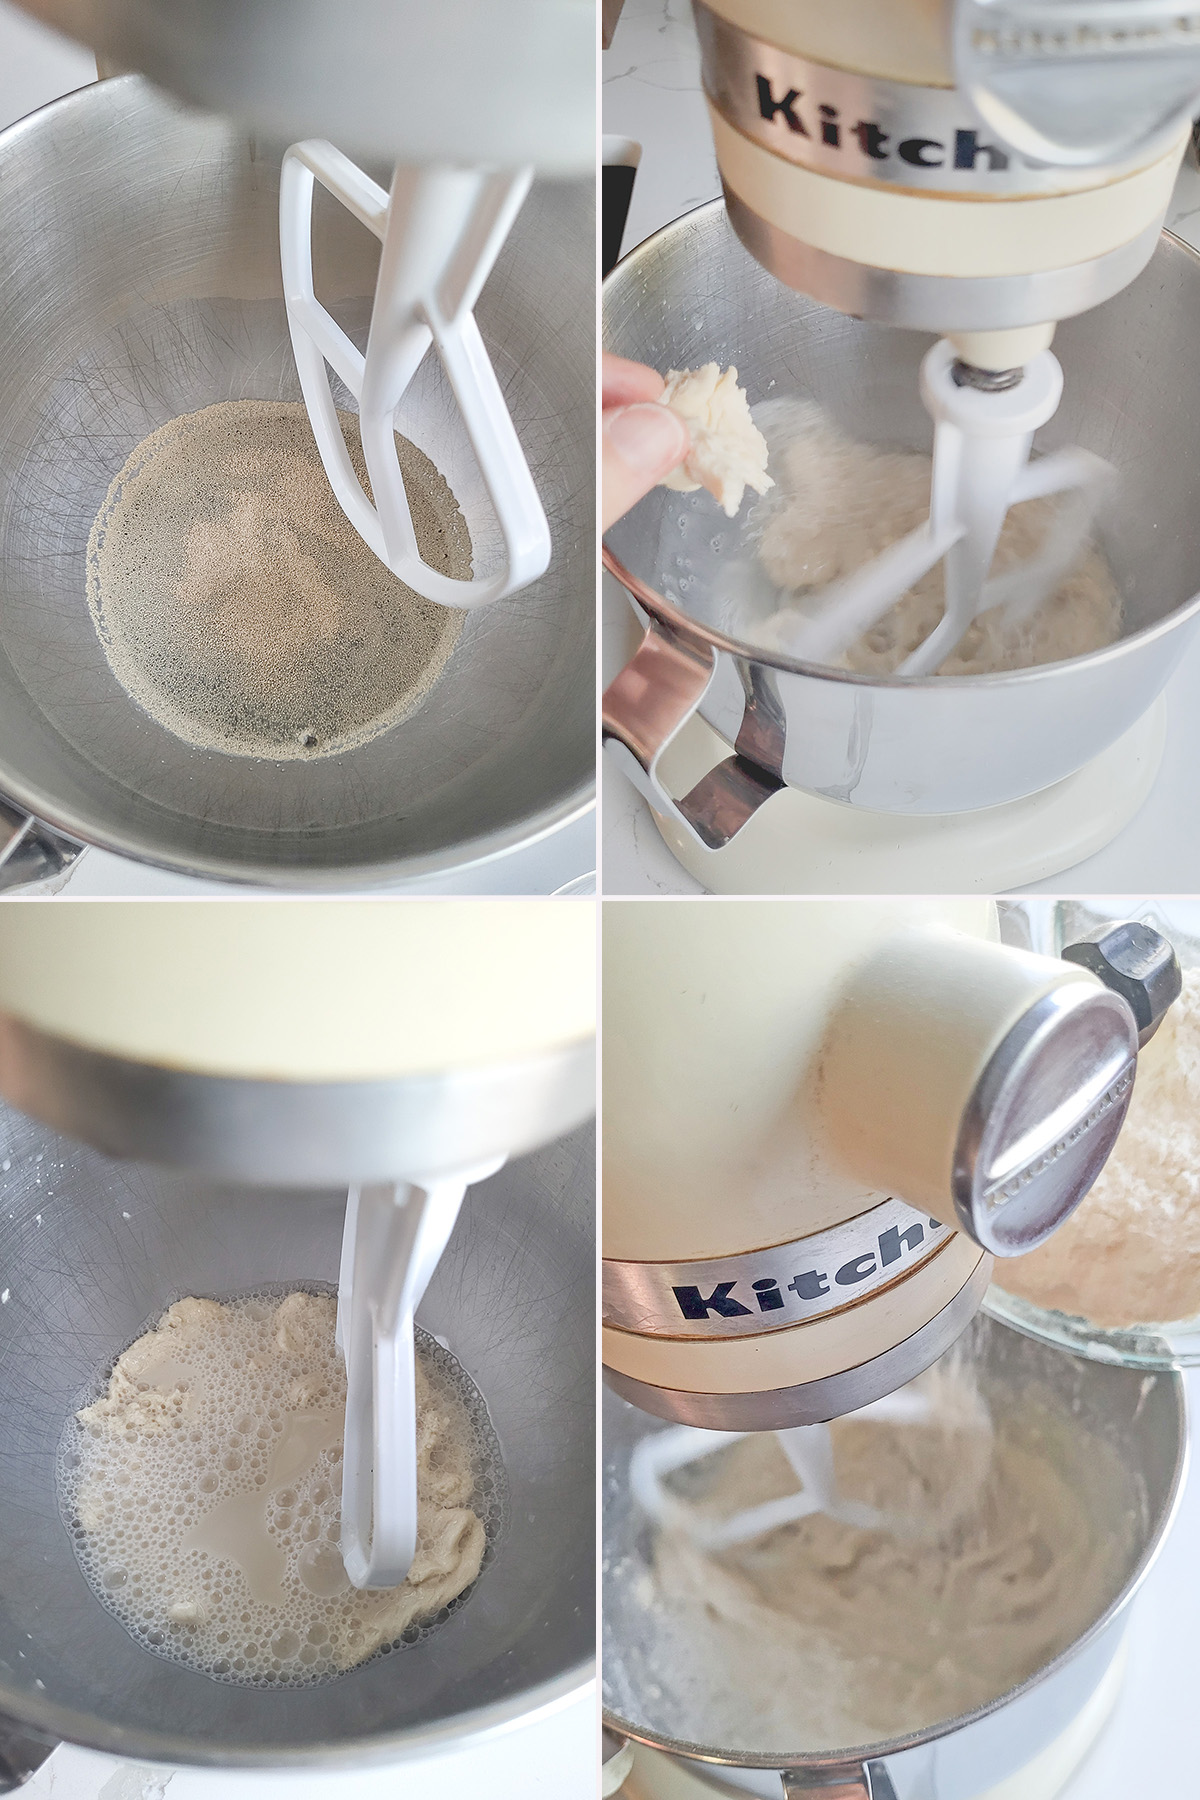 yeast, water and biga in a mixing bowl.